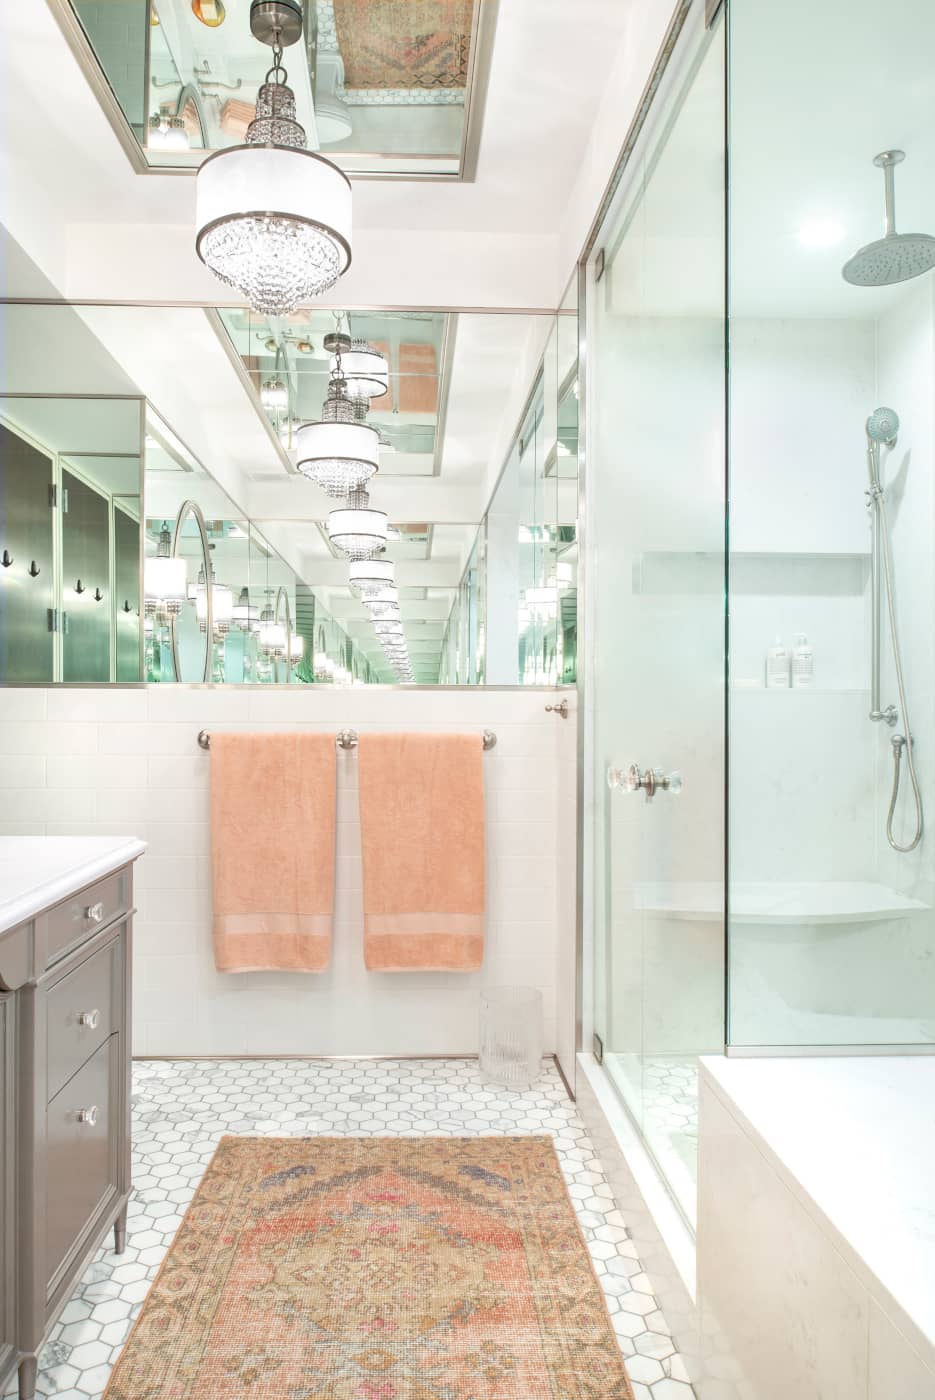 Because of the multitude and placement of the mirrors, you get an infinity mirror effect, reflecting the bathroom's luxurious details again and again and again.